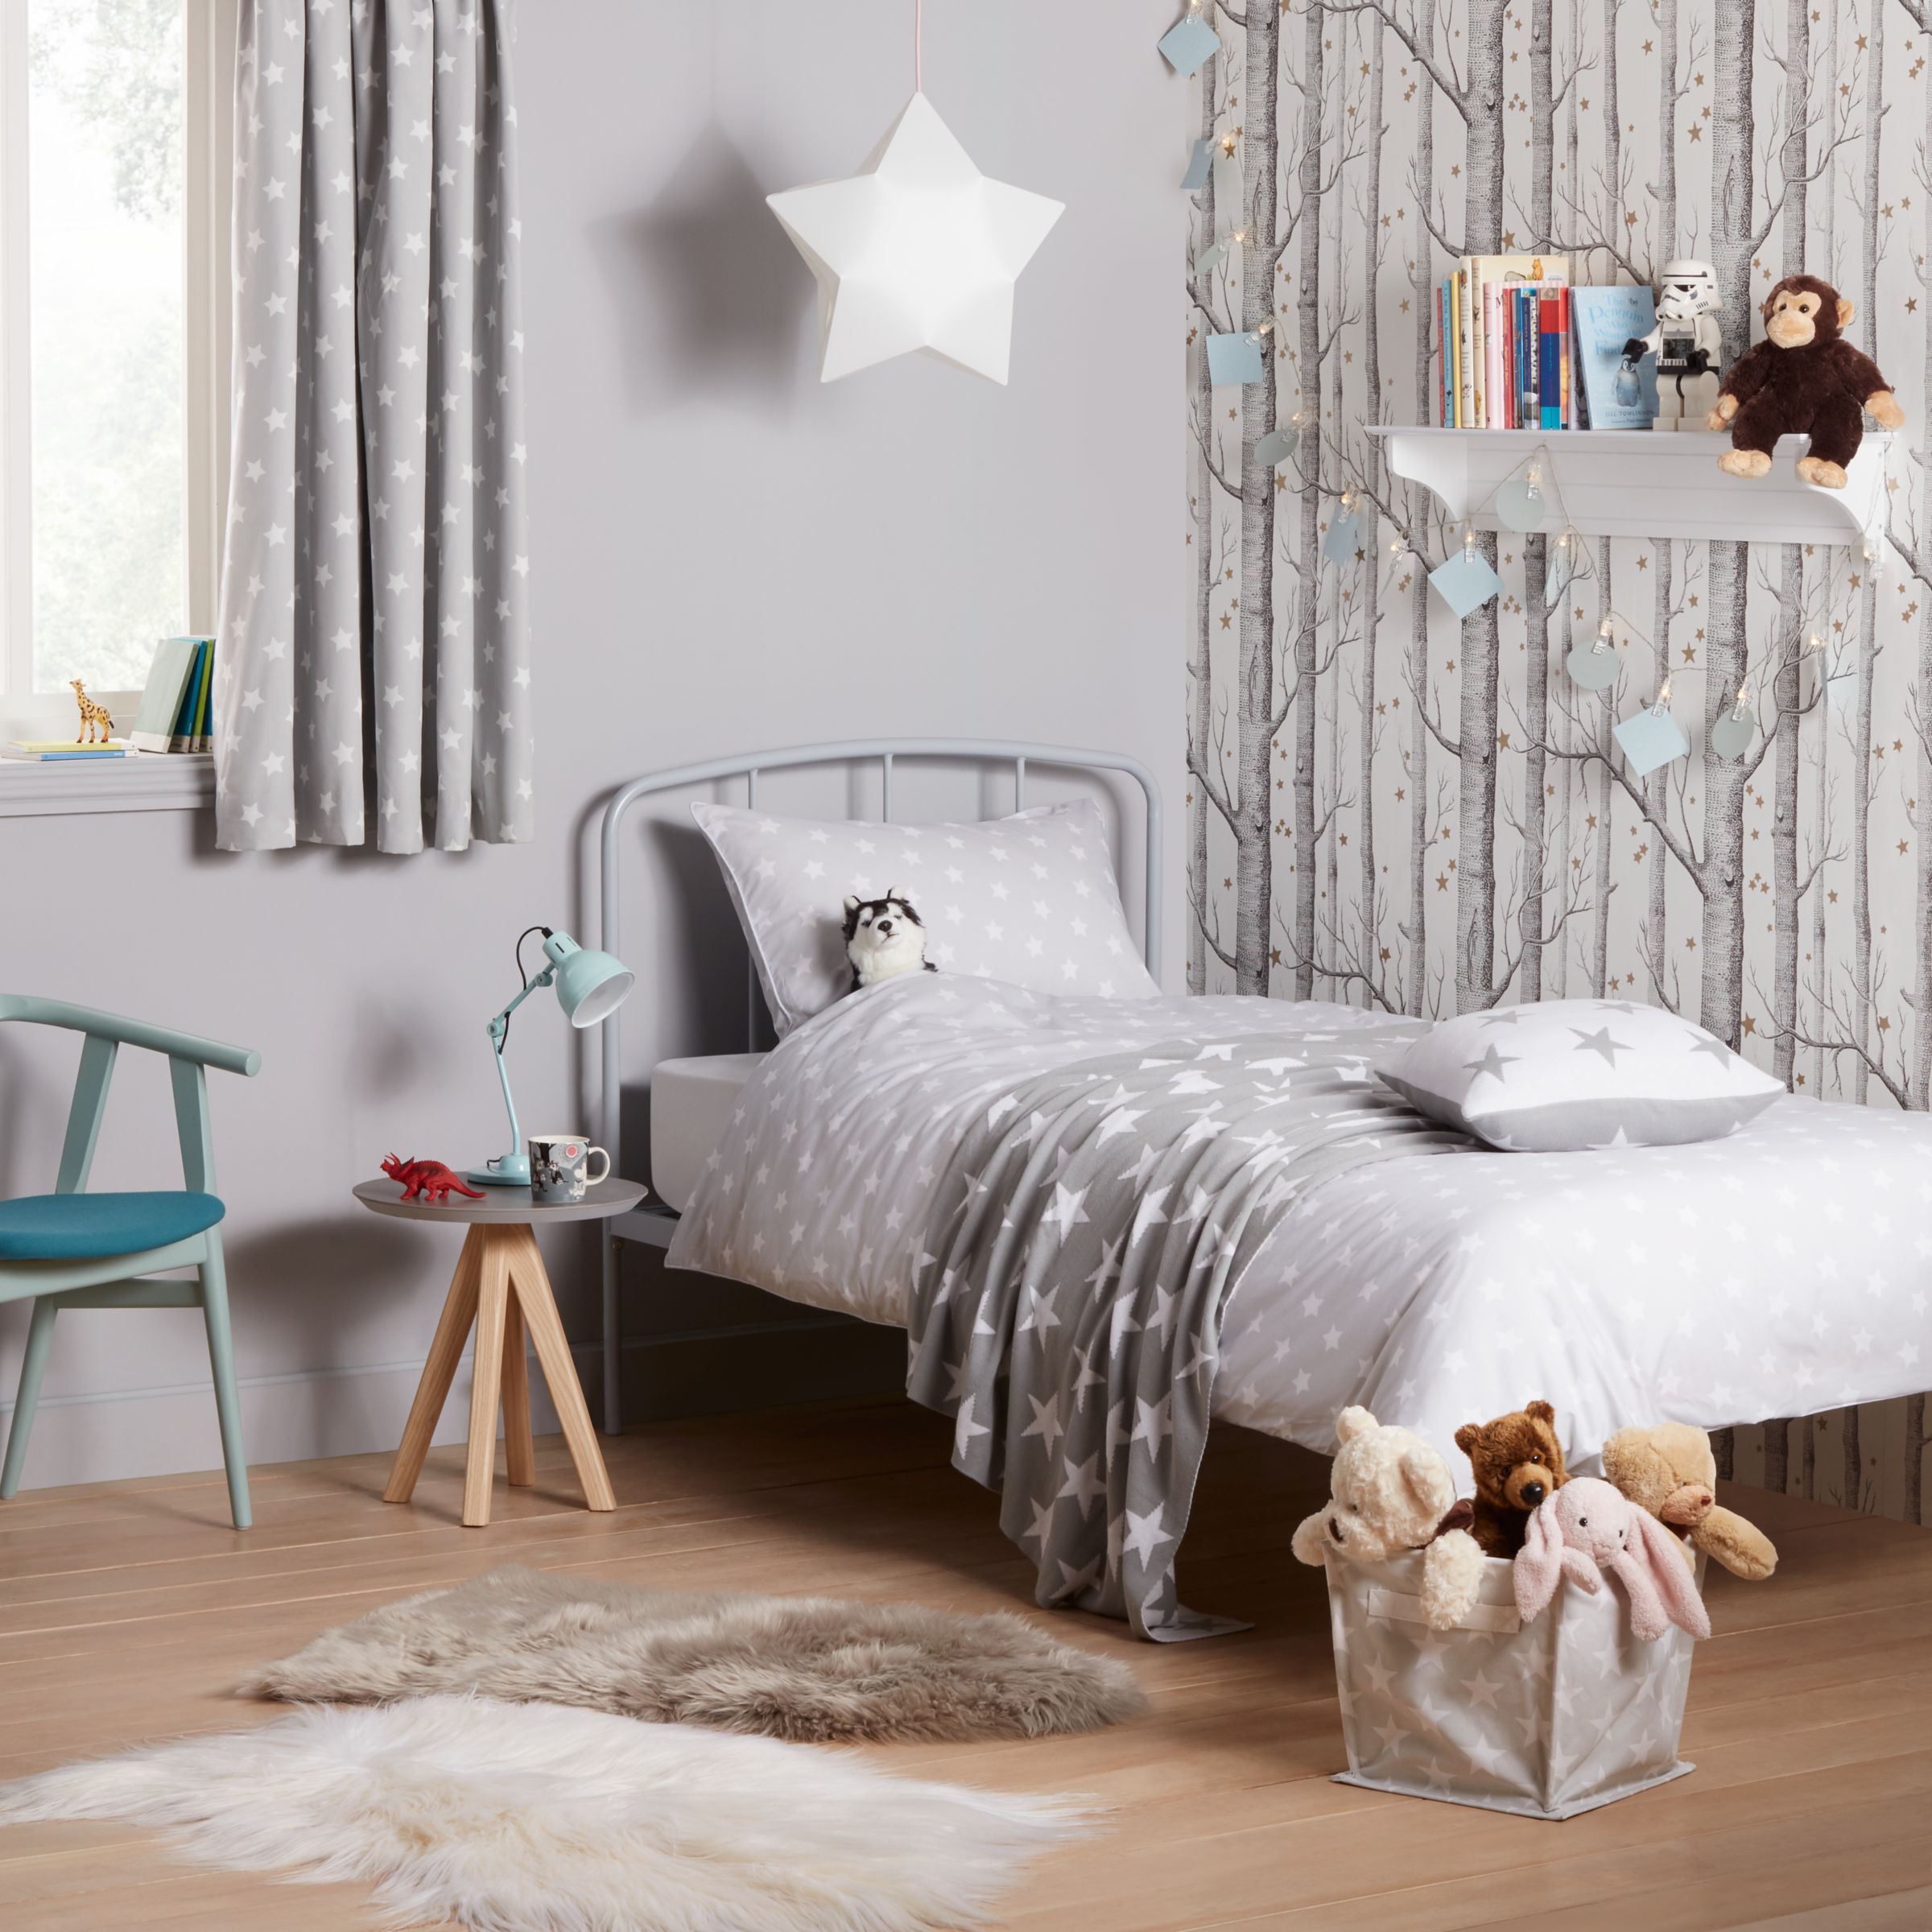 Little Home At John Lewis Star Reversible Duvet Cover And